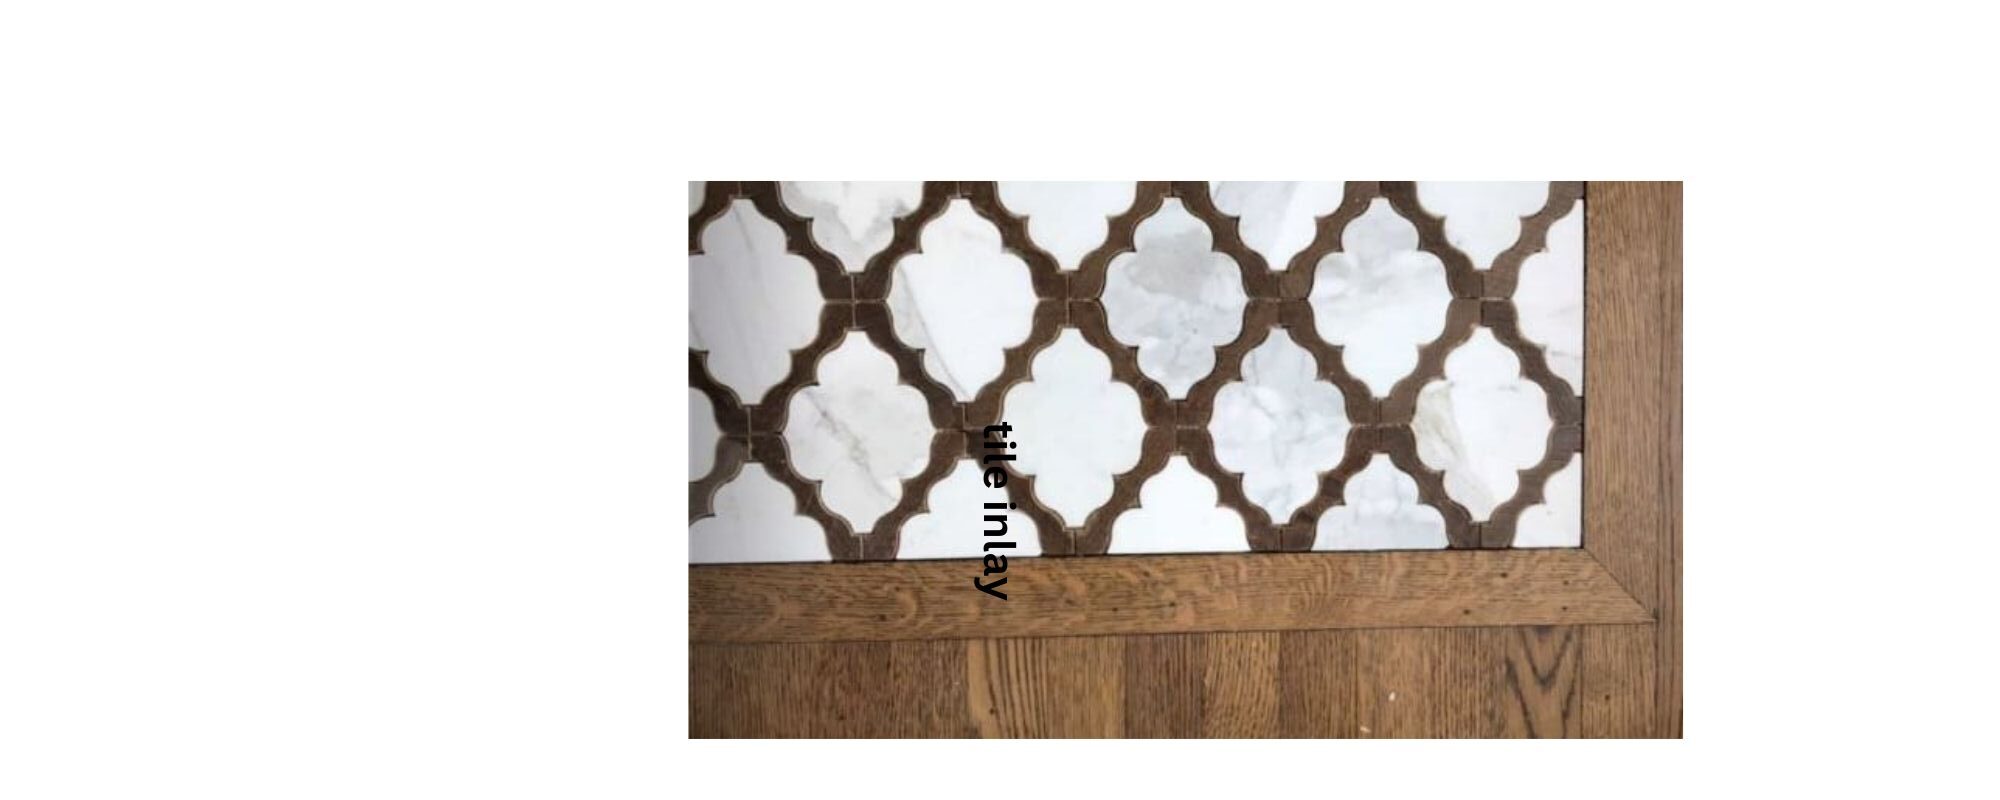 Tile inlay as a kitchen tile to wood floor transition ideas.